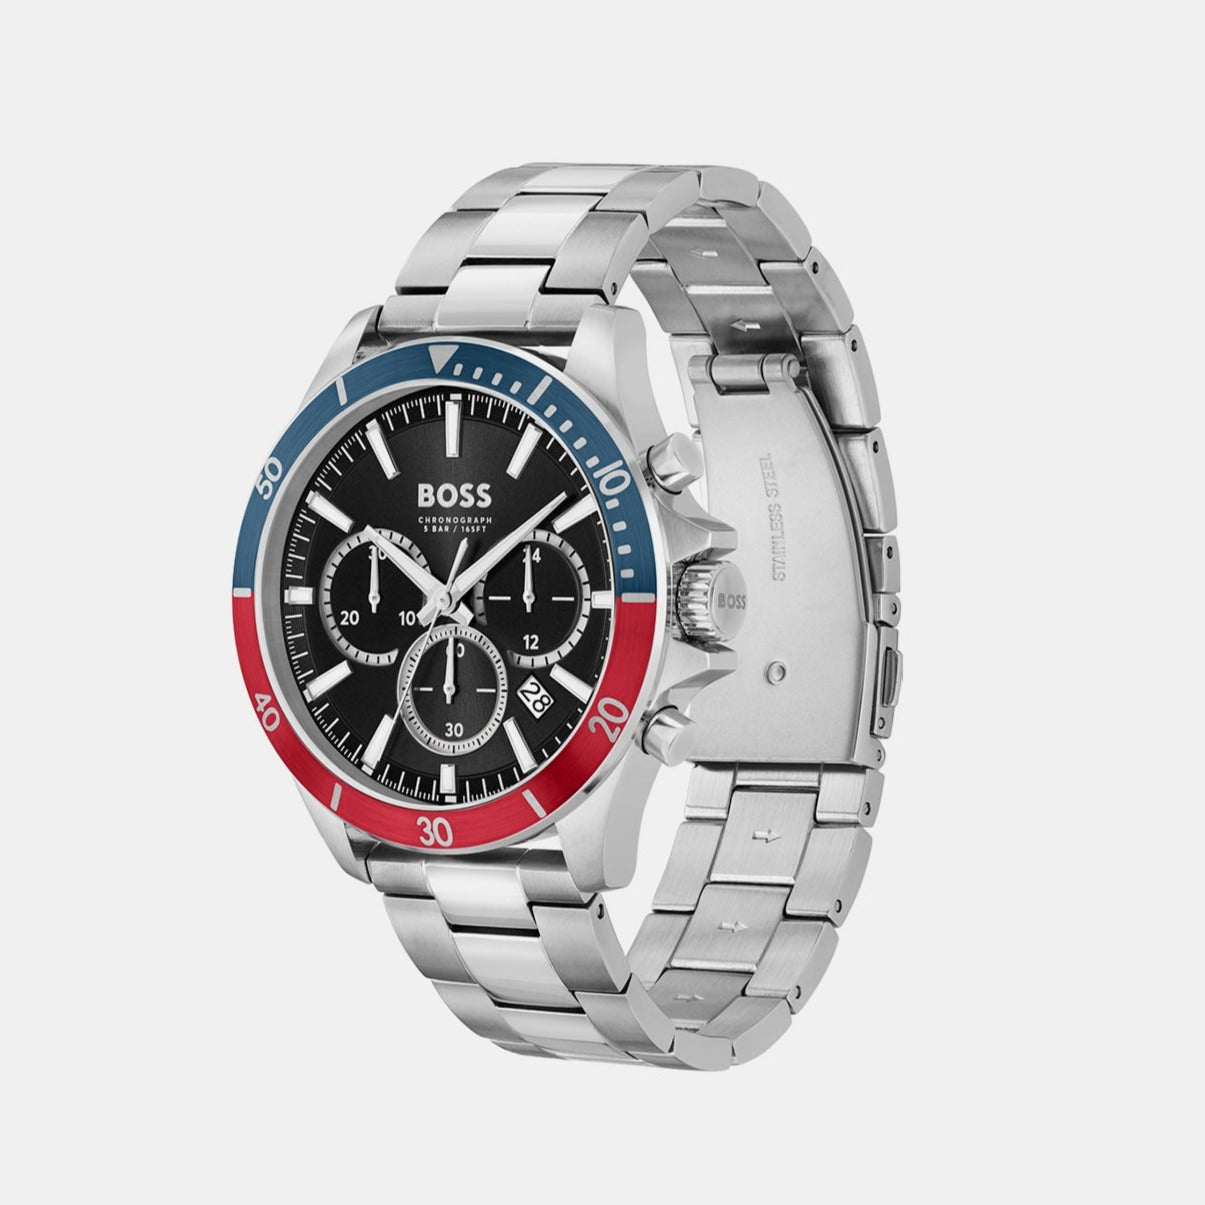 Time Steel Black Just Stainless Watch Chronograph Male Troper – In 1514108